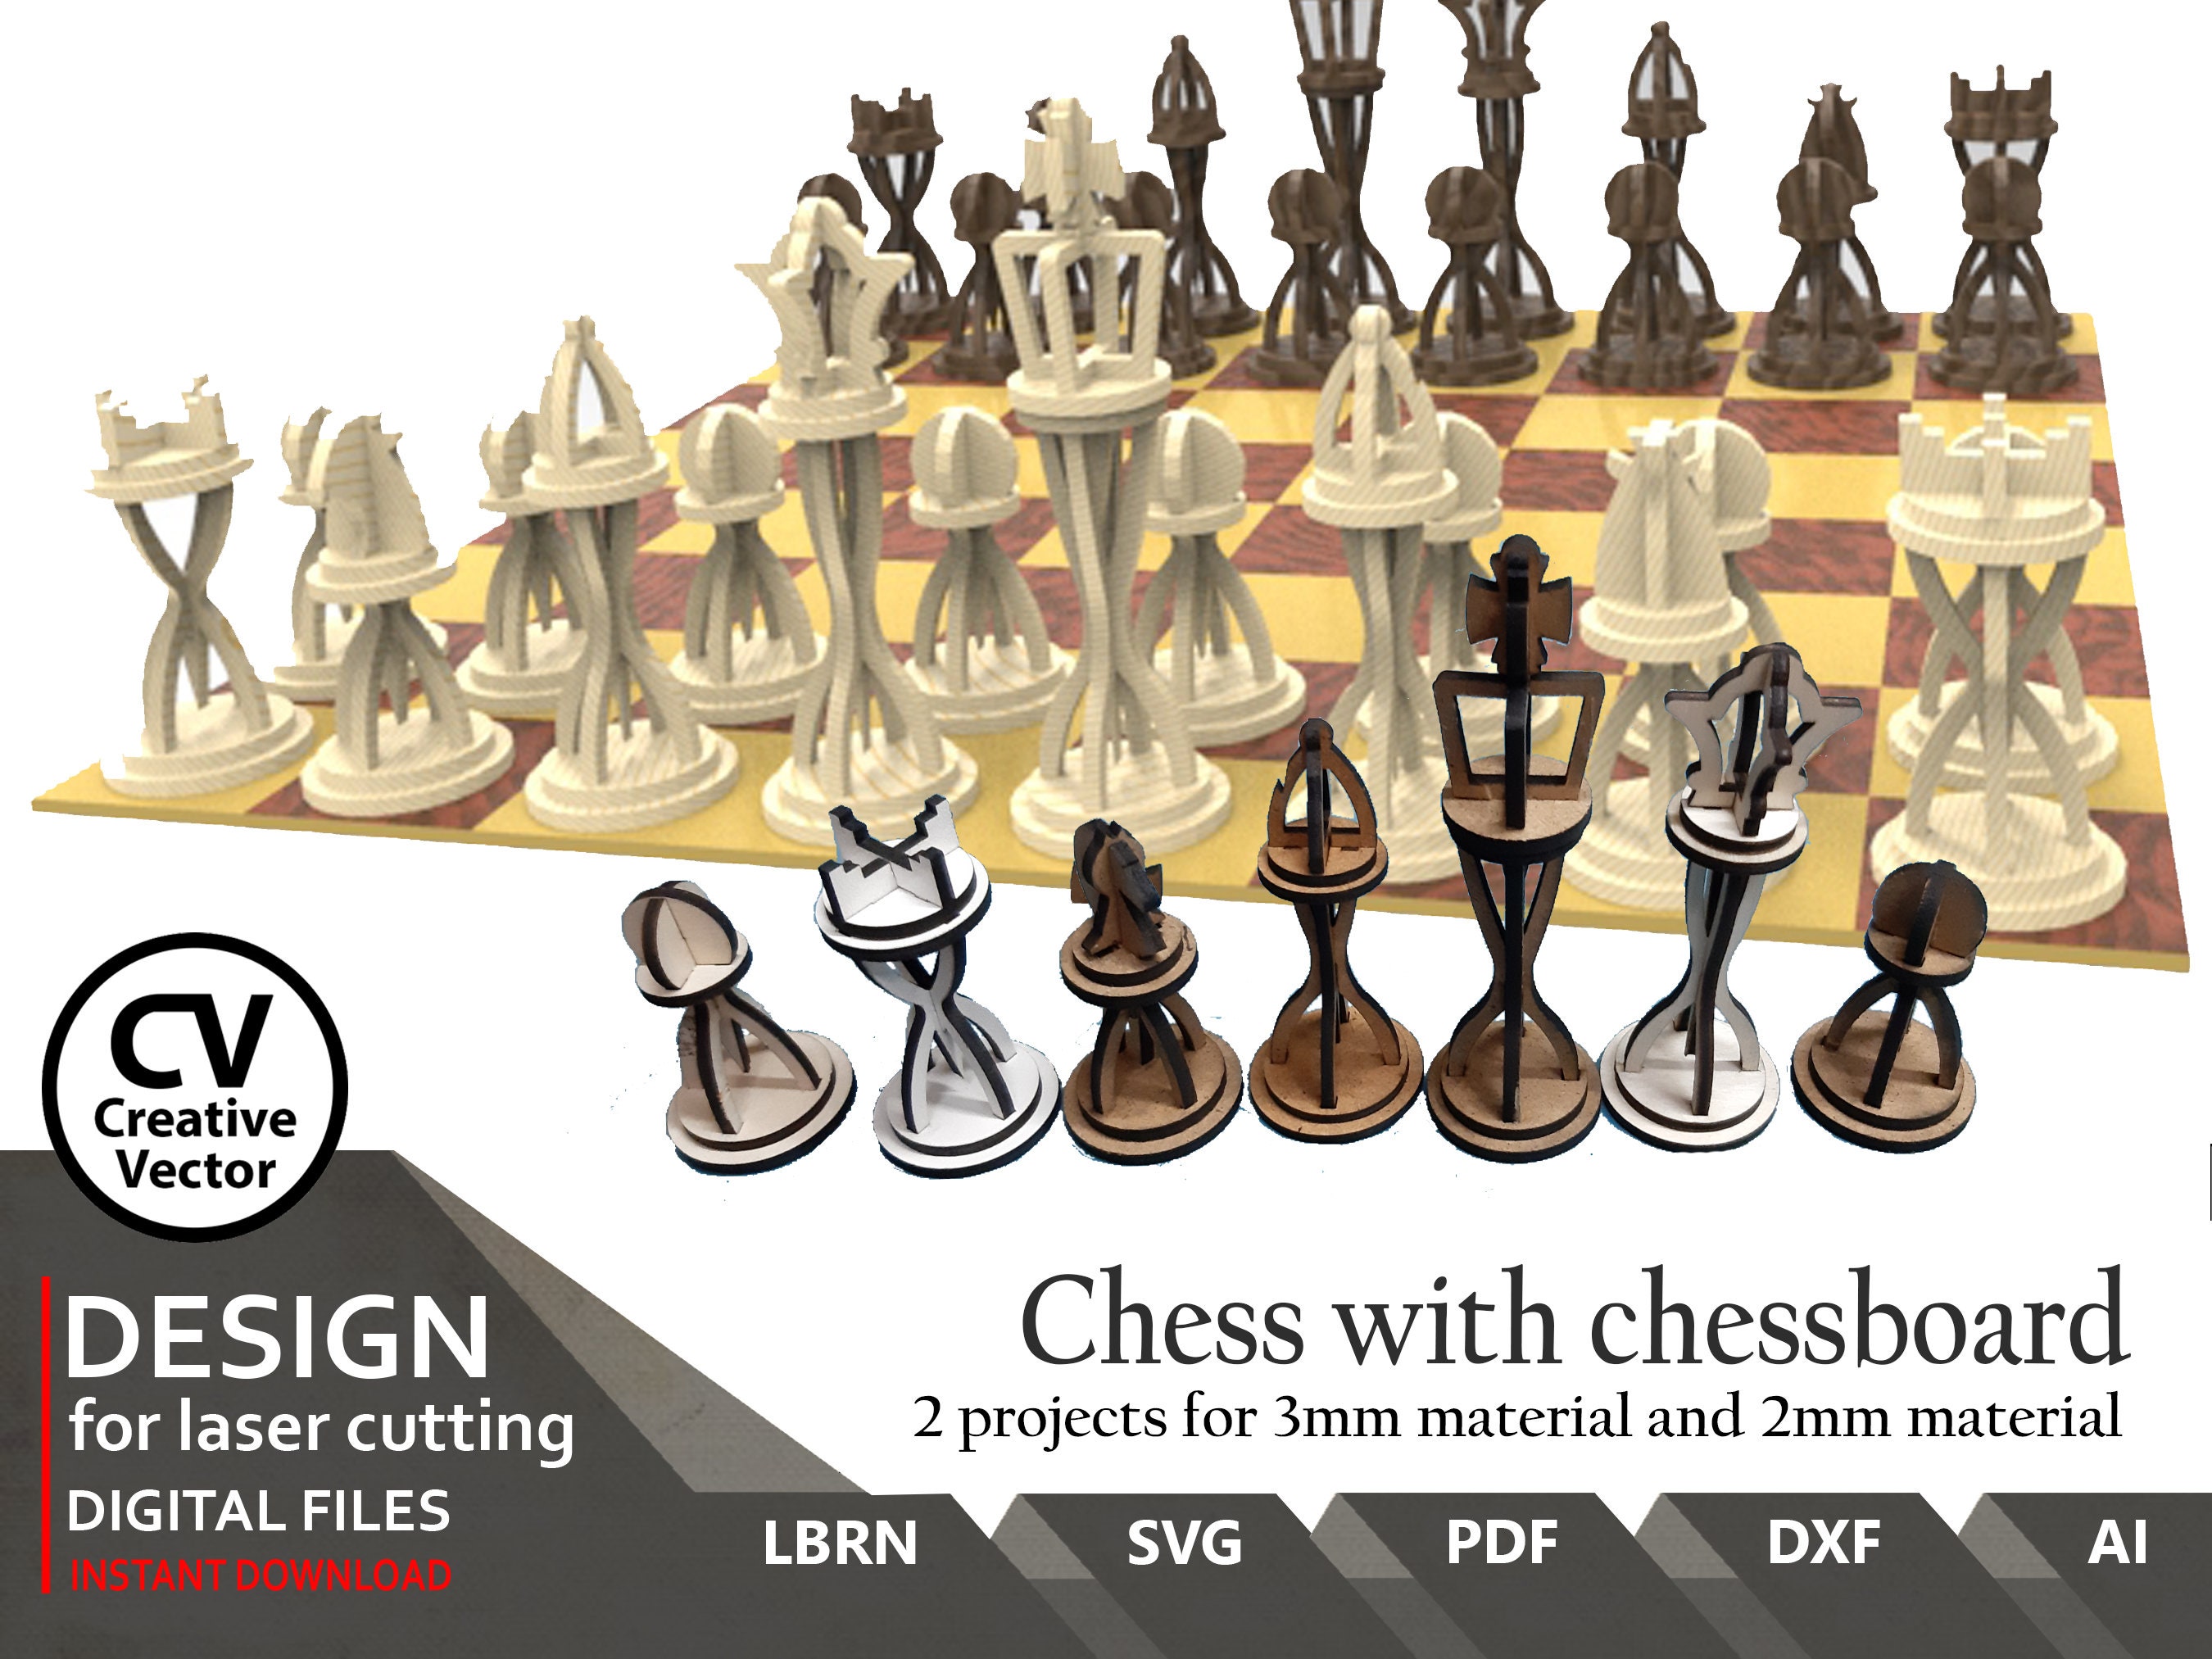 File:AAA SVG Chessboard and chess pieces 04.svg - Wikimedia Commons